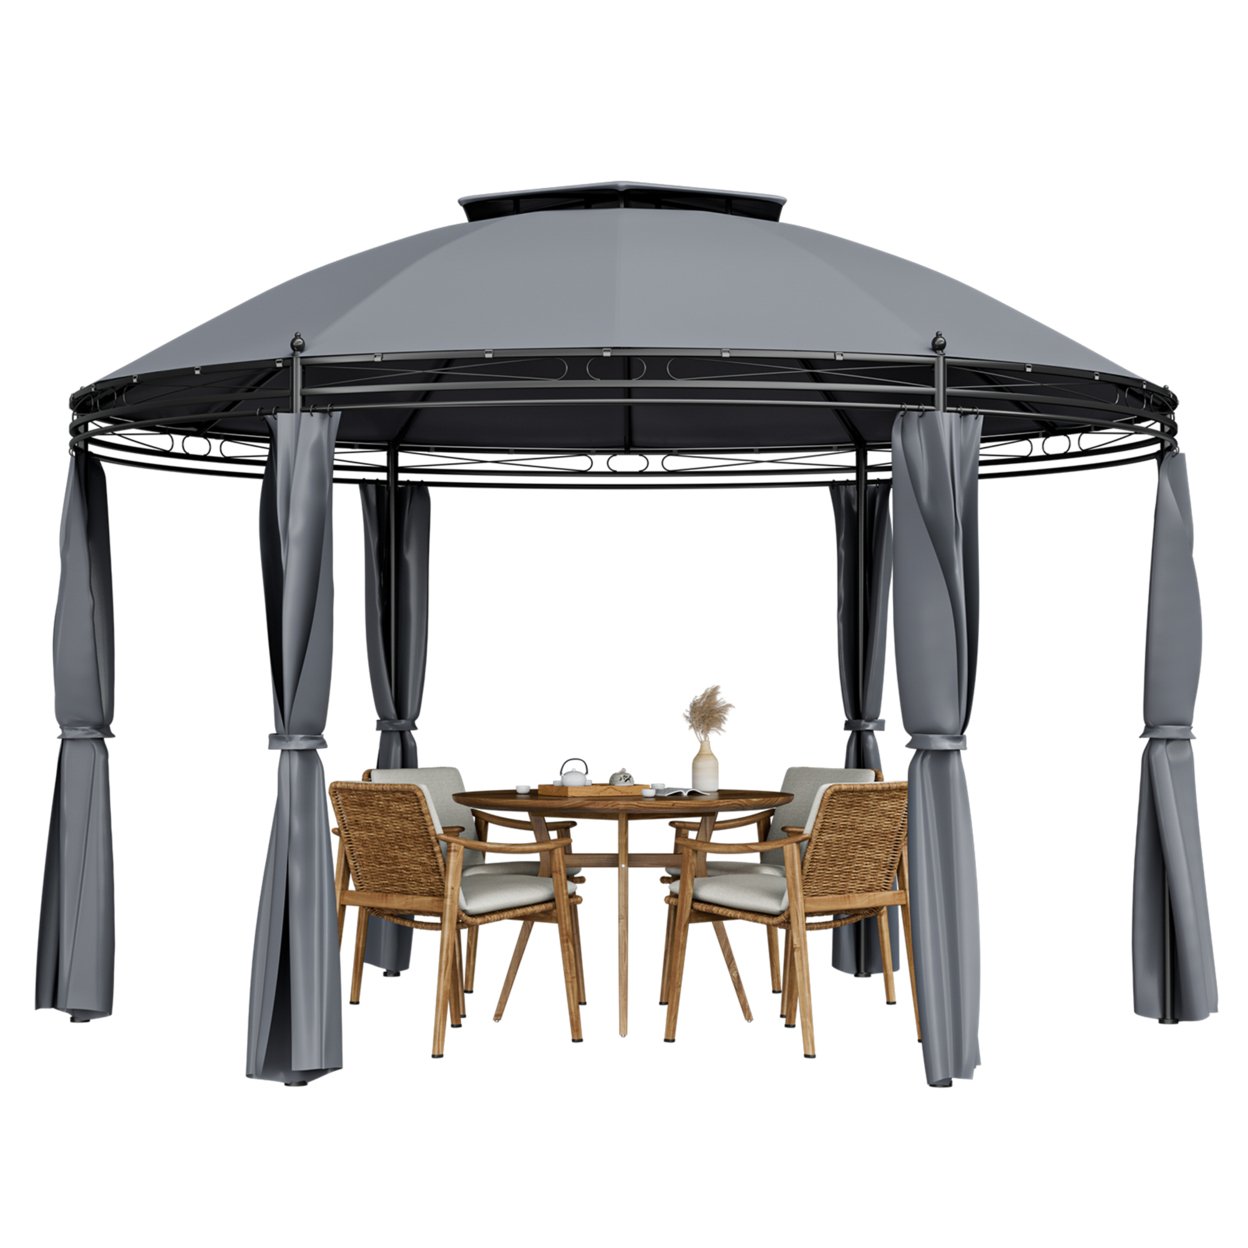 Gymax 11.5 Outdoor Patio Round Dome Gazebo Canopy Shelter Double Roof Steel Gray